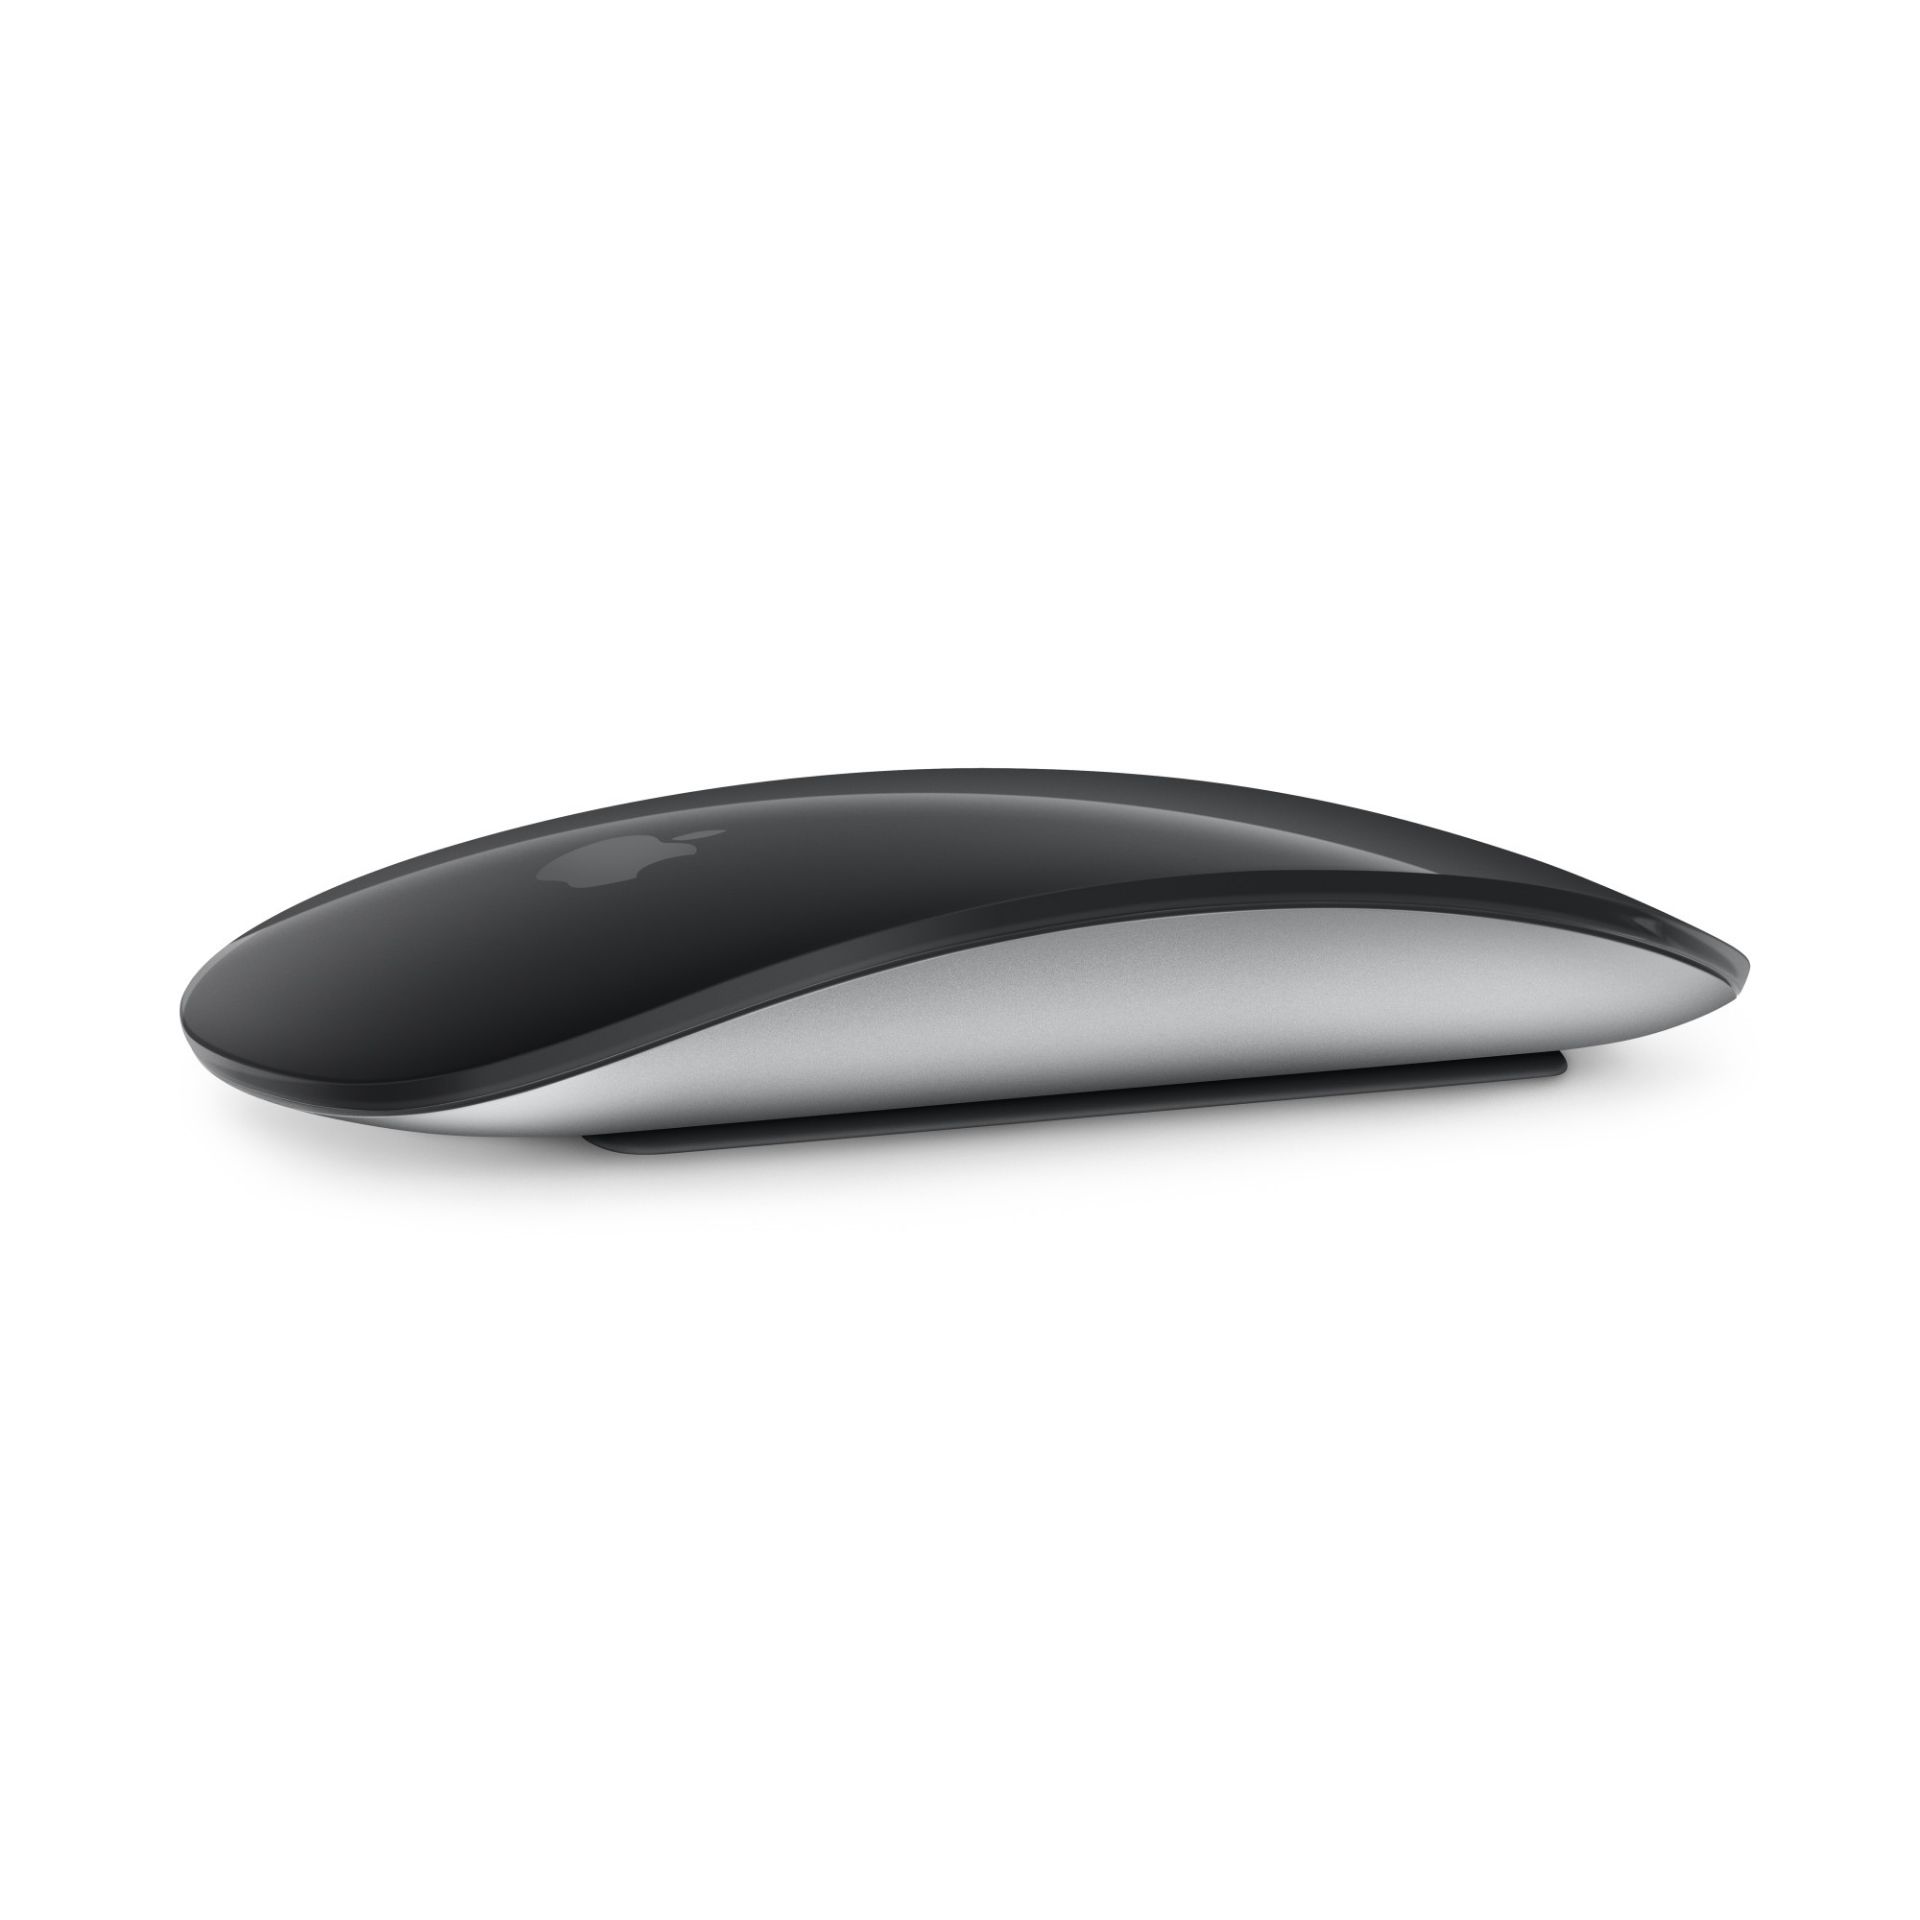 Picture of Apple Magic Mouse - Black Multi-Touch Surface